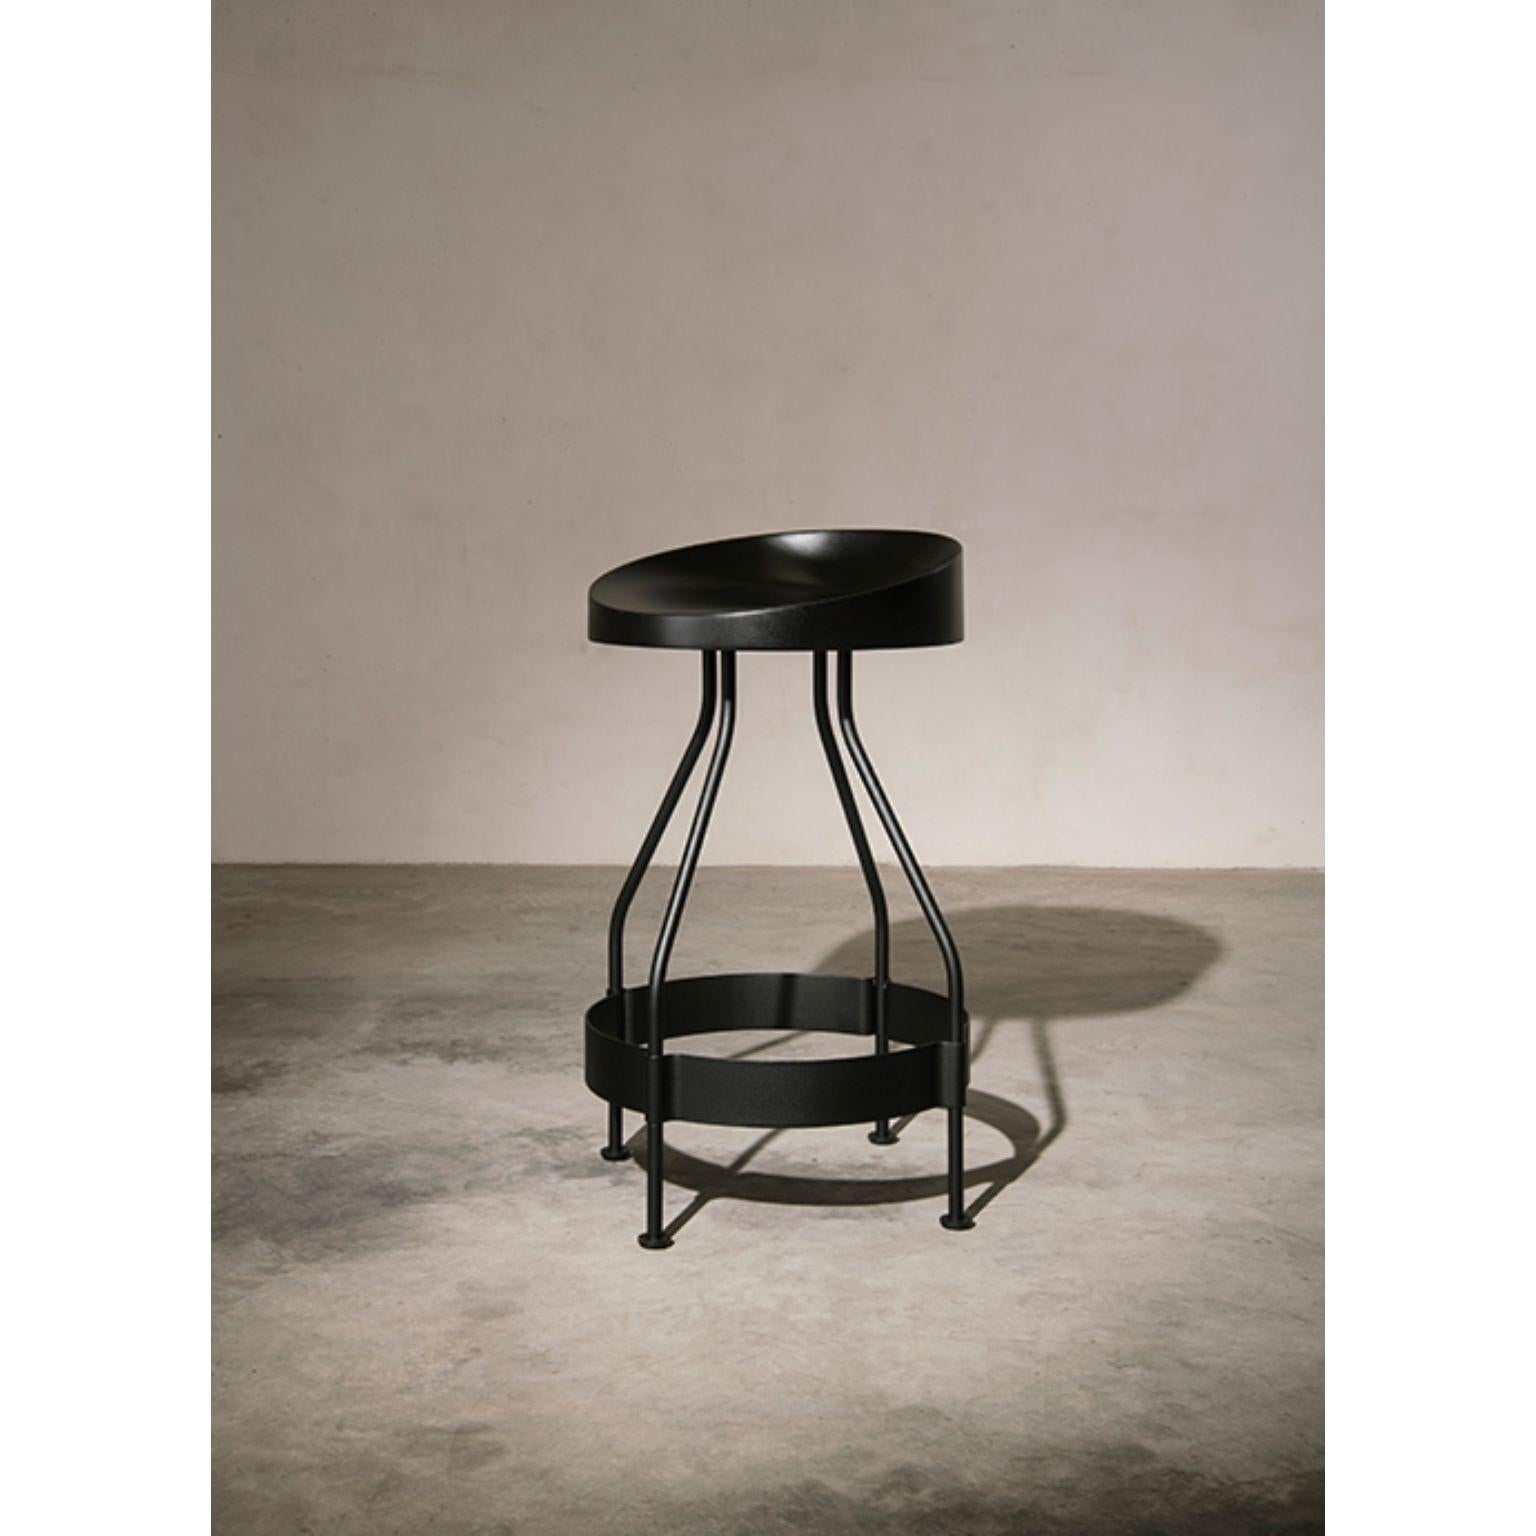 Olindias bar stool by Luca Nichetto
Materials: Shell: Dark green NCS 8010 B70G/Coral NCS 2570 Y70R/ Duck Blue NCS 6020 B10G/Warm 
 Light NCS 2002 Y50R lacquered Polyurethane
 Structure: Black powder-coated metal
Dimensions: W48. 2 x D48.2 x H83